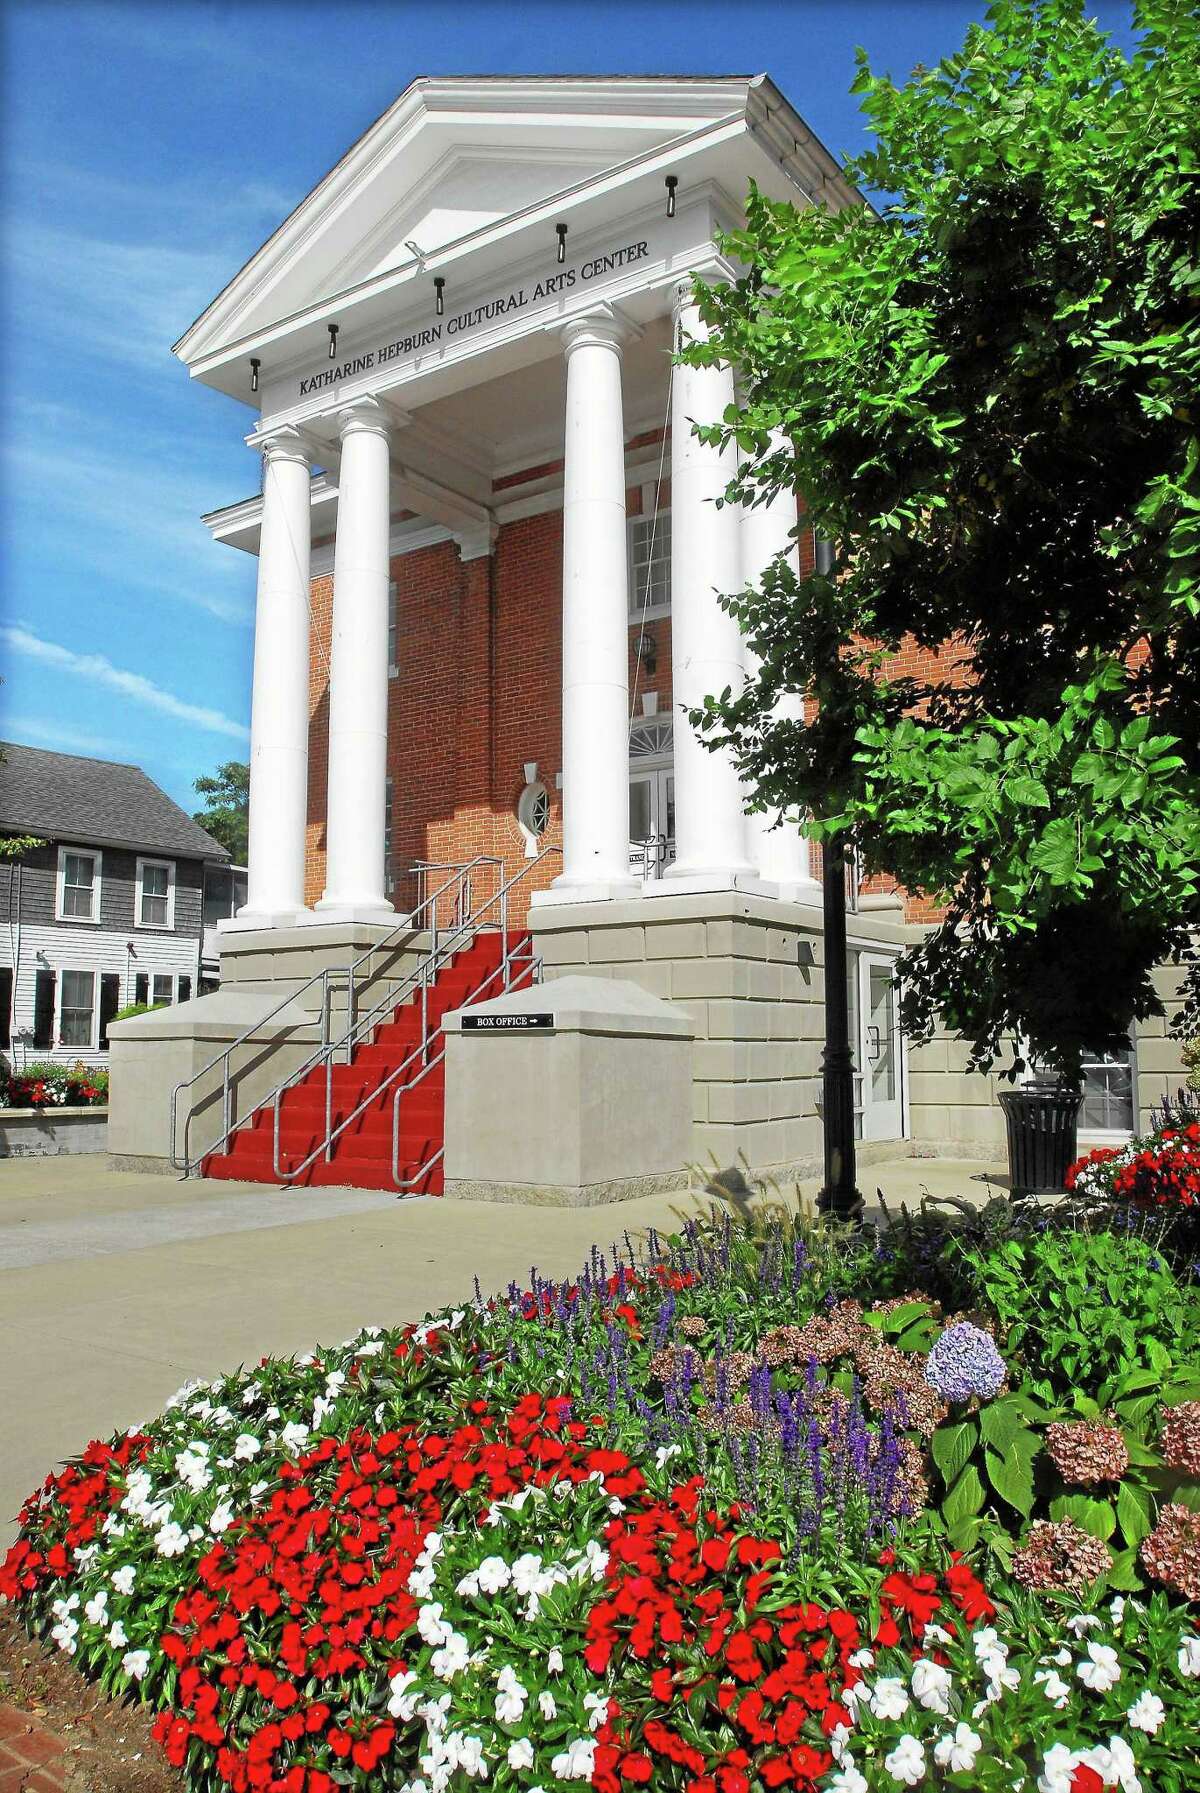 |The Katharine Hepburn Cultural Arts Center is on Main Street in Old Saybrook.